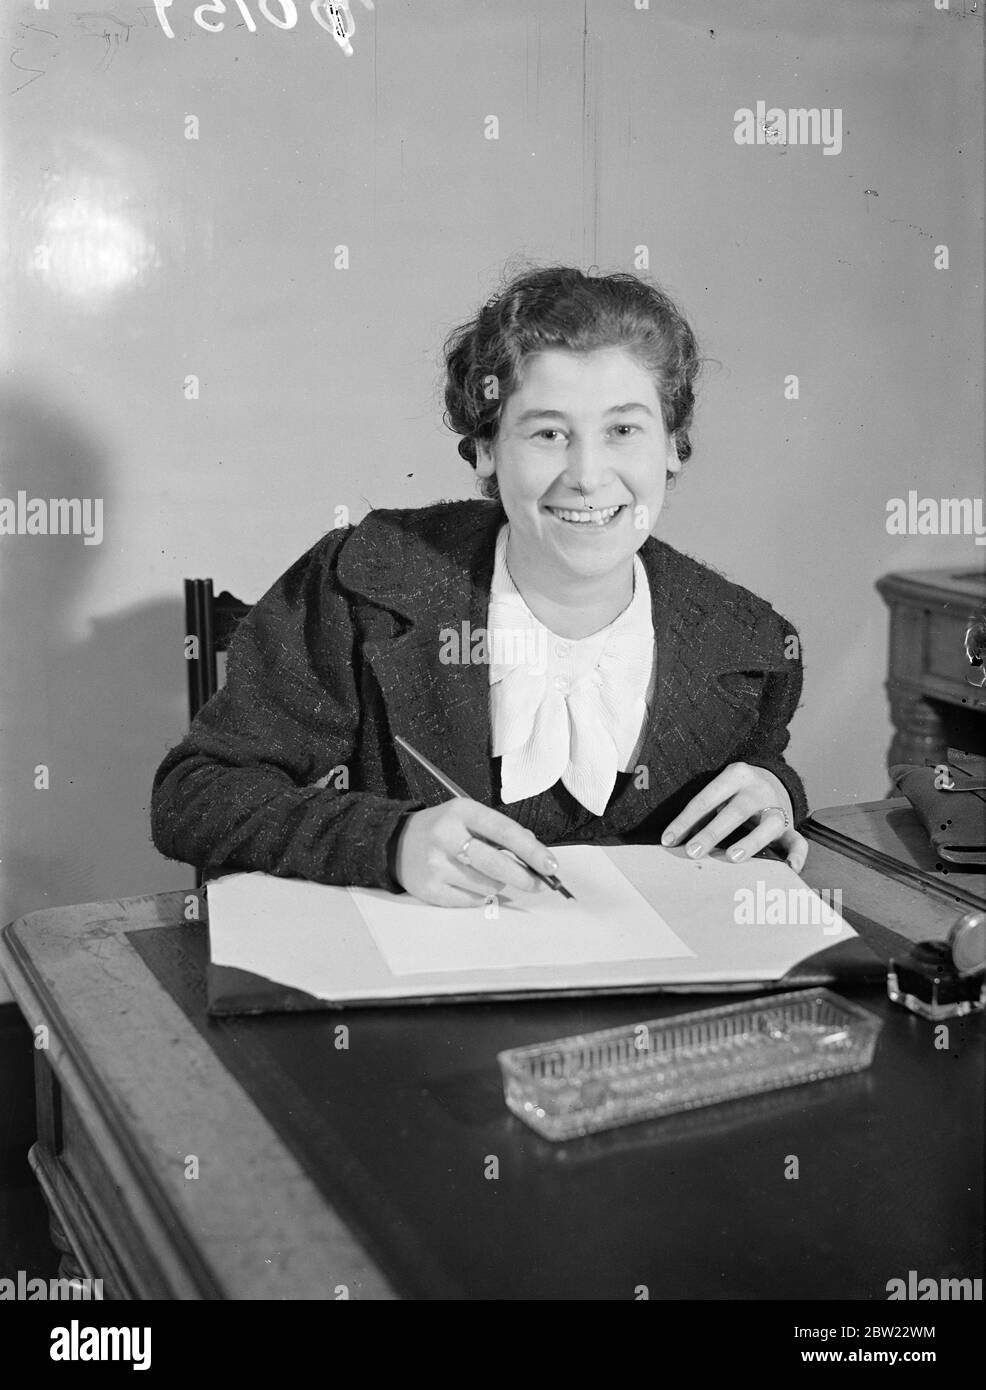 Miss Florence Davies aged 22 preparing her speech to give at the conference of the women's Liberal Federation at Margate. She was speaking about her five years experience in service, she will give evidence at the conference on wages, working hours, time off, accommodation and the shortage of domestic servants. 9 October 1937. Stock Photo